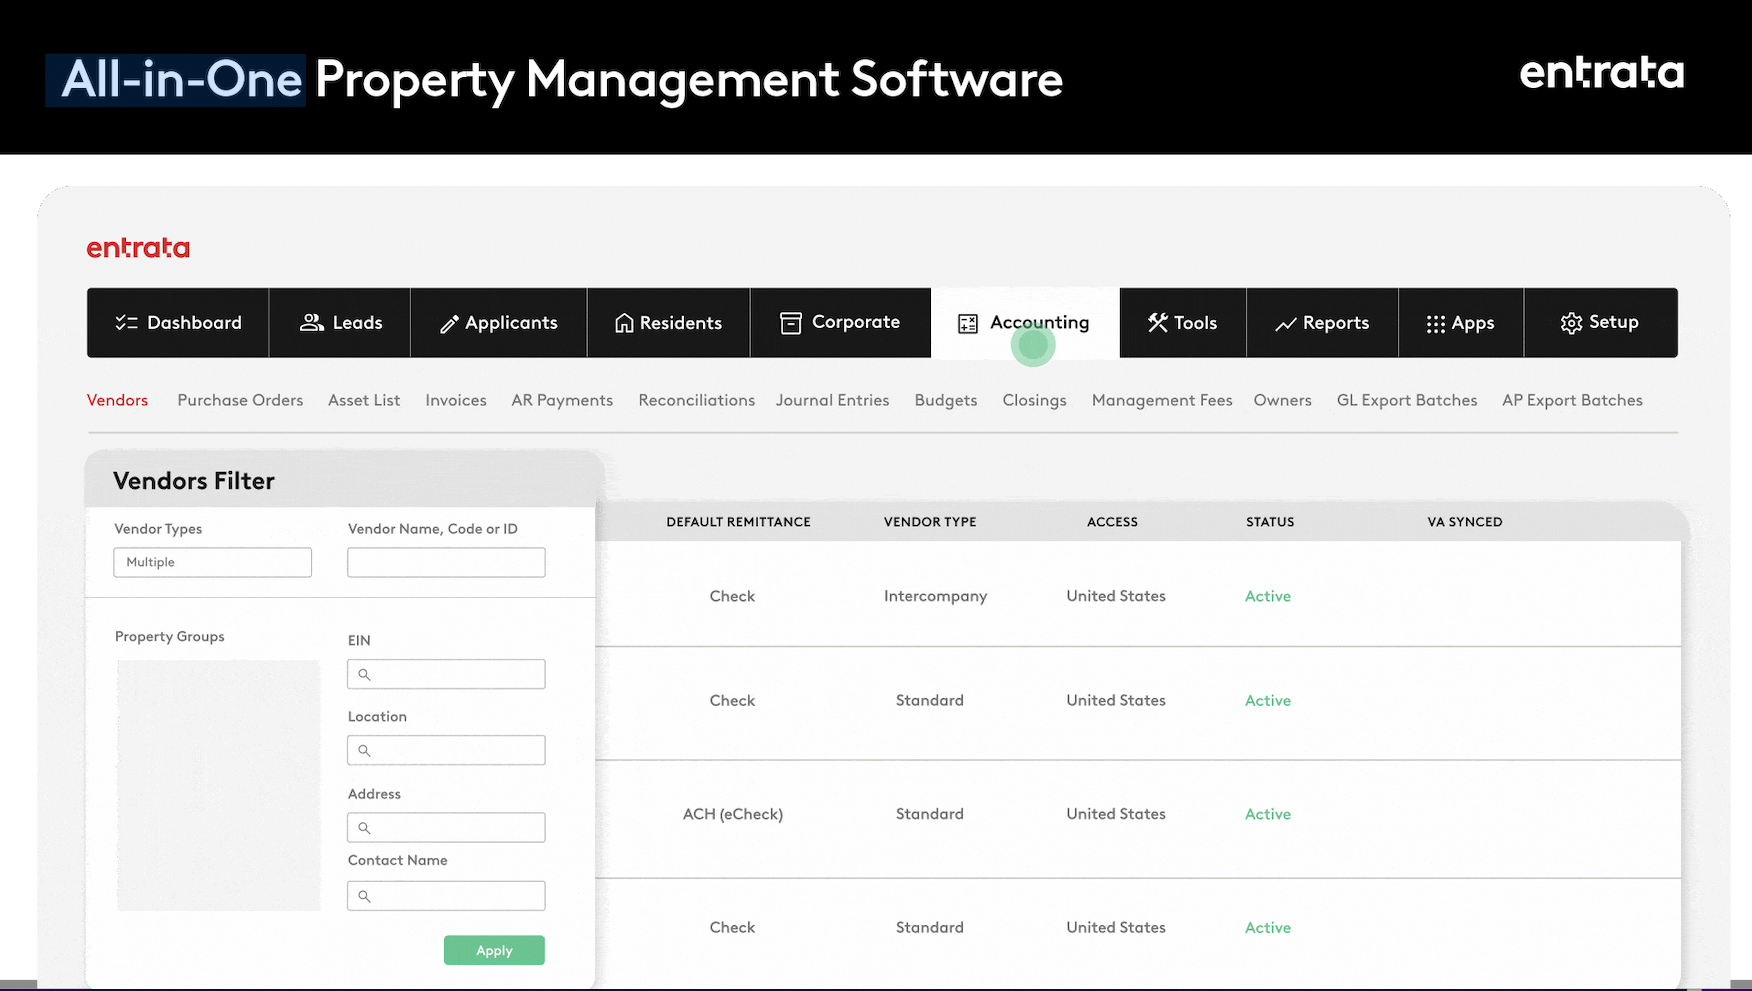 Built with the intention of streamline the most business-critical functions of property management, Entrata's Core solution is designed to automate and streamline workflows, provide actionable insights, and align with operation's needs and growth. 
